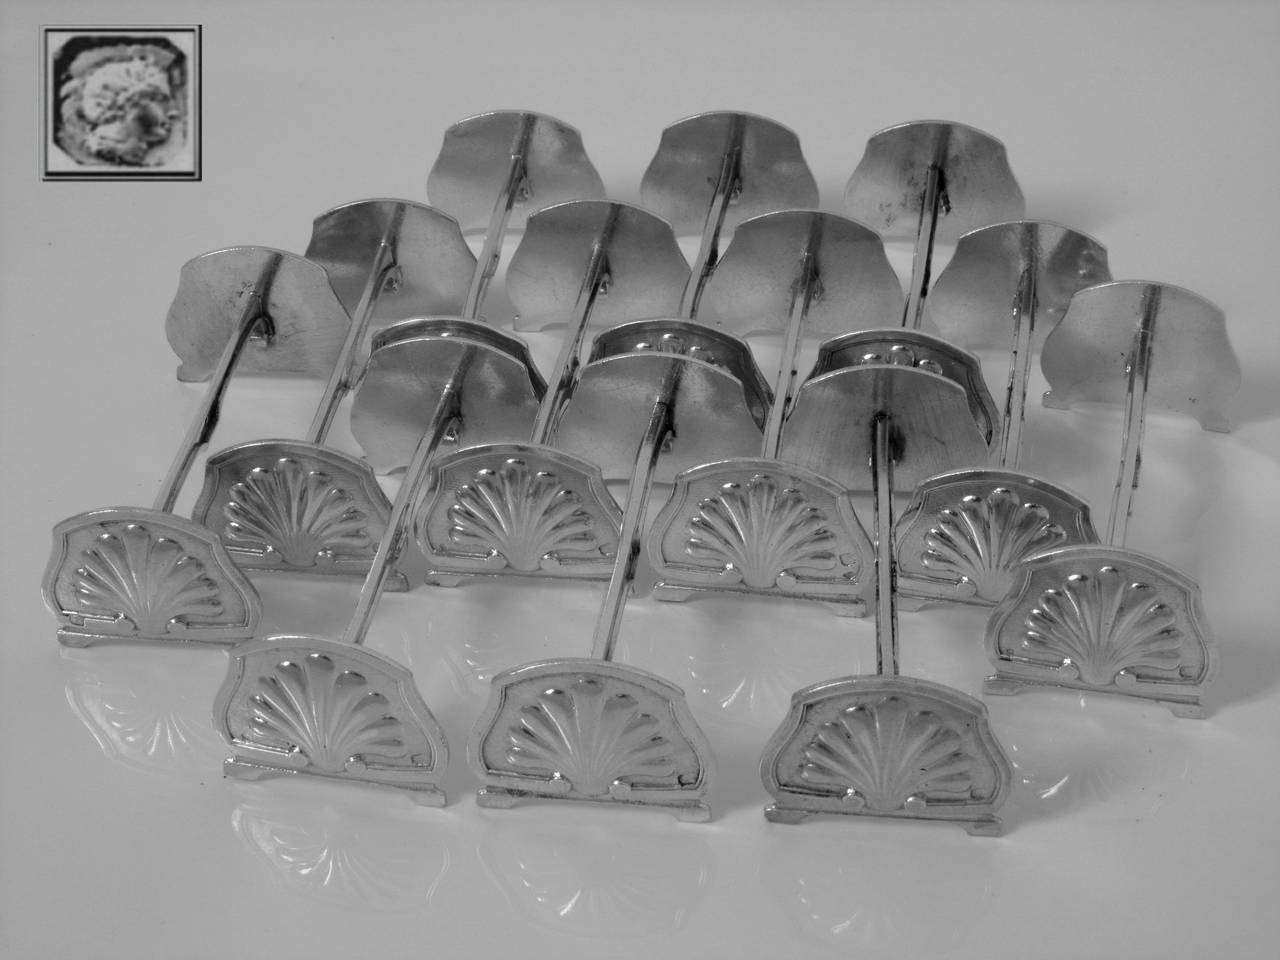 Gorgeous French All Sterling Silver Knife Rests Set 12 pc Shells Model

Extremely rare model of knife rests set. It is even rarer to see full service of 12 pieces of french sterling silver. These objects are usually made of silverplate. Finesse of